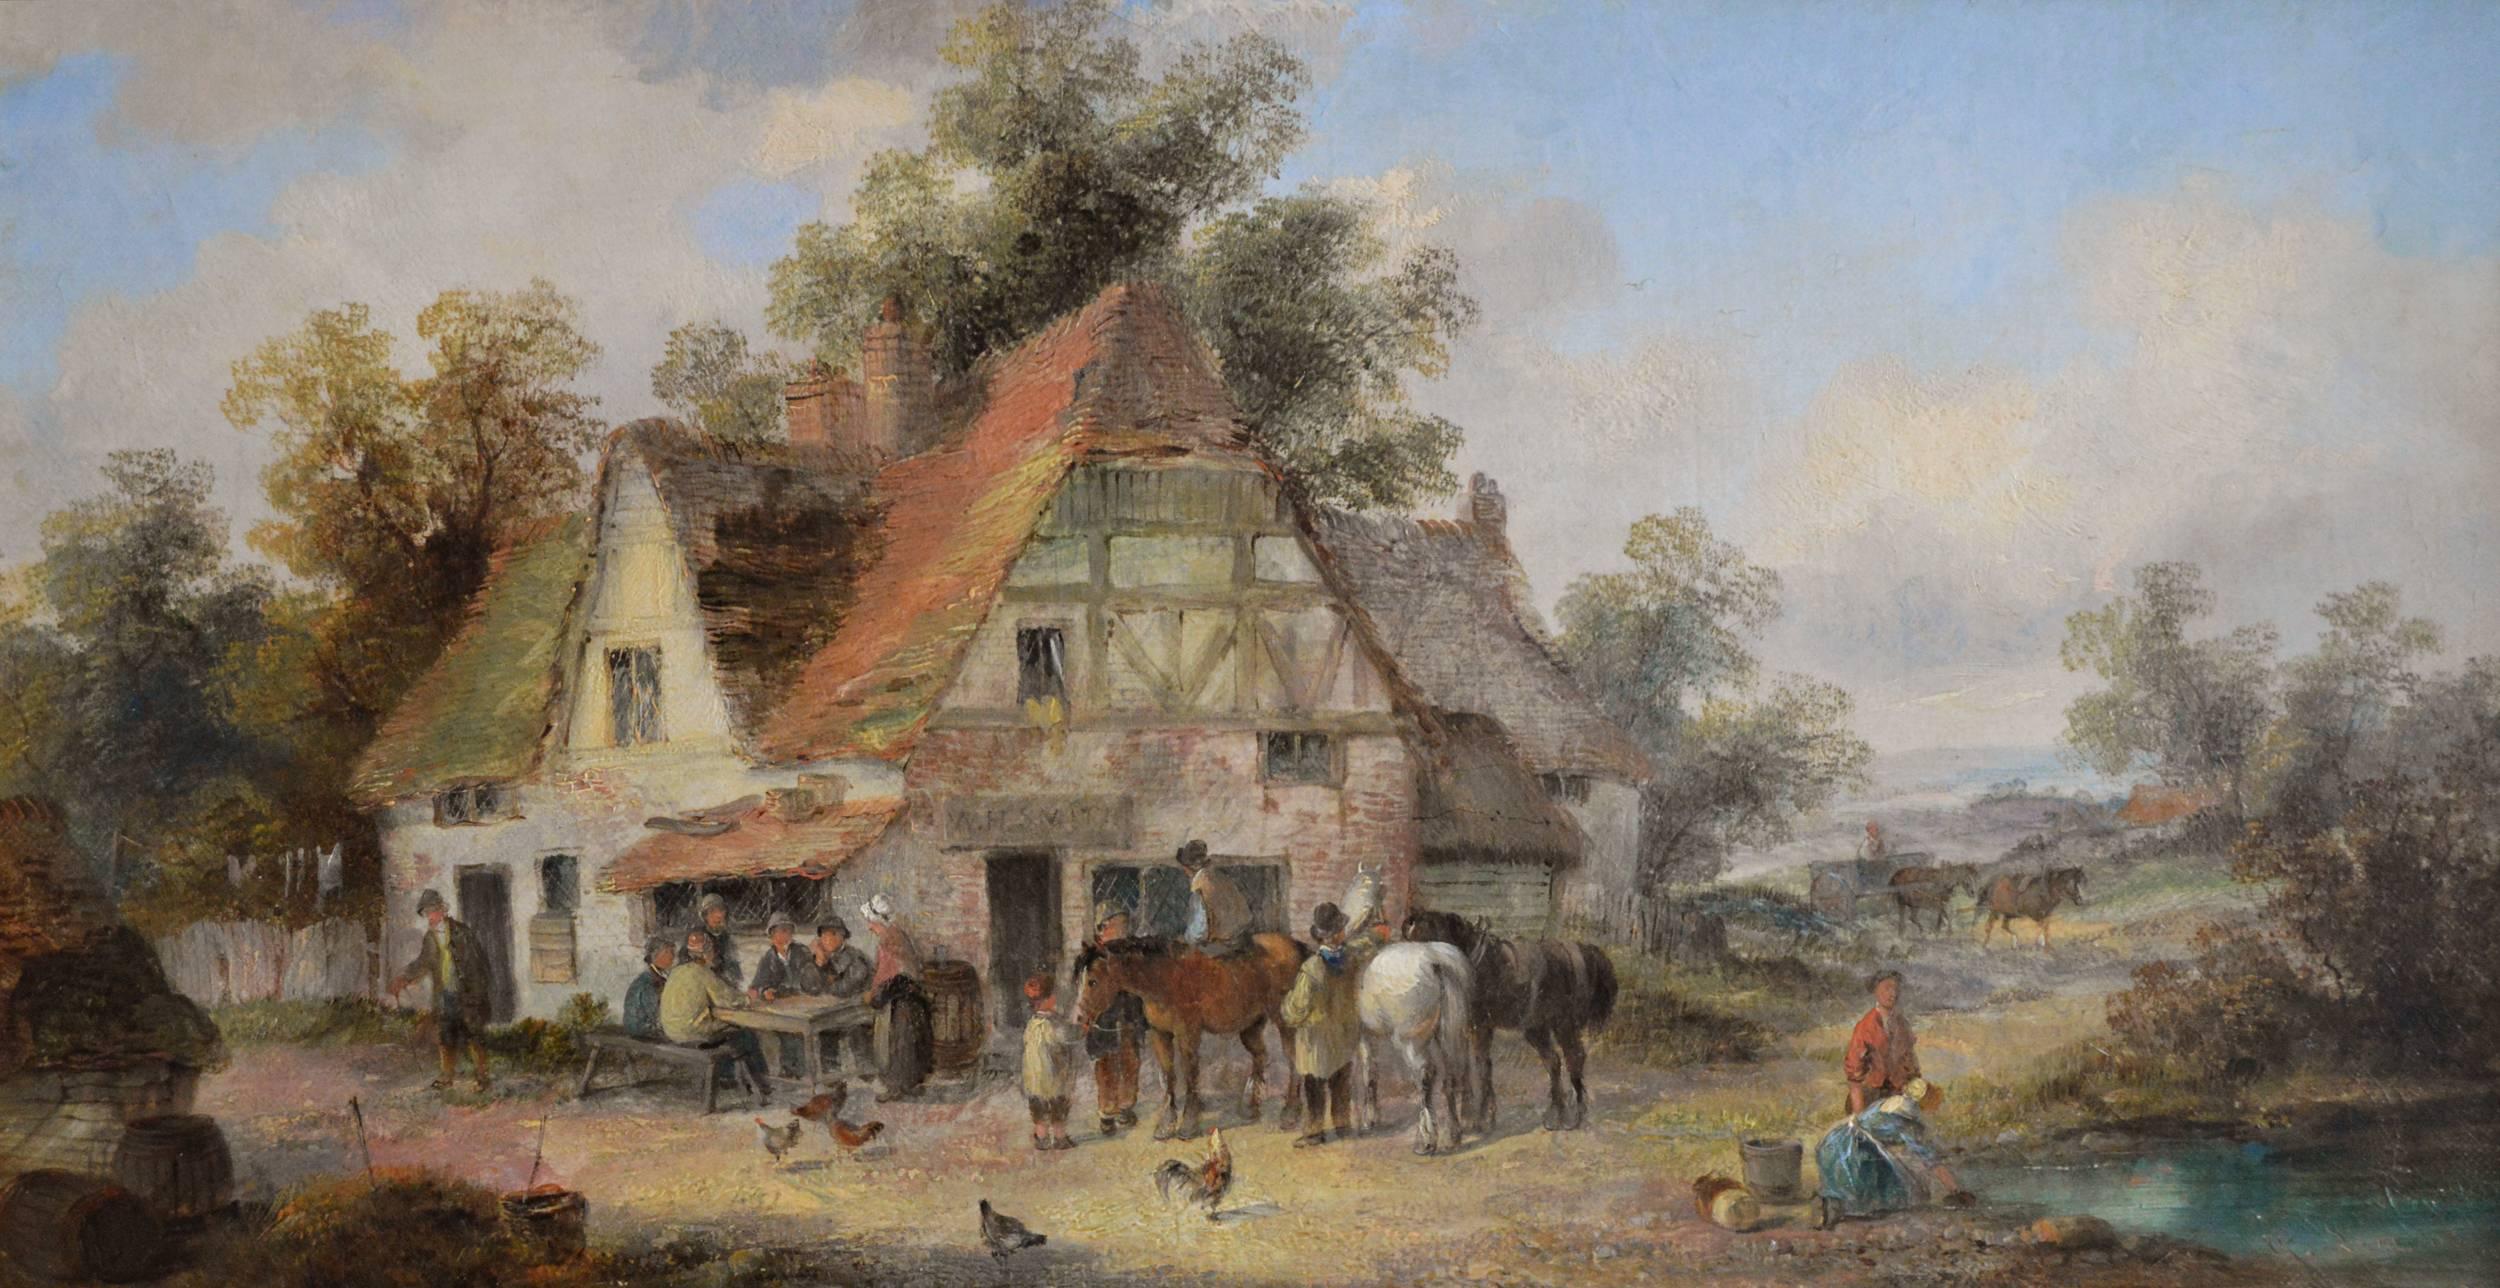 19th Century landscape oil painting of a village - Painting by Georgina Lara